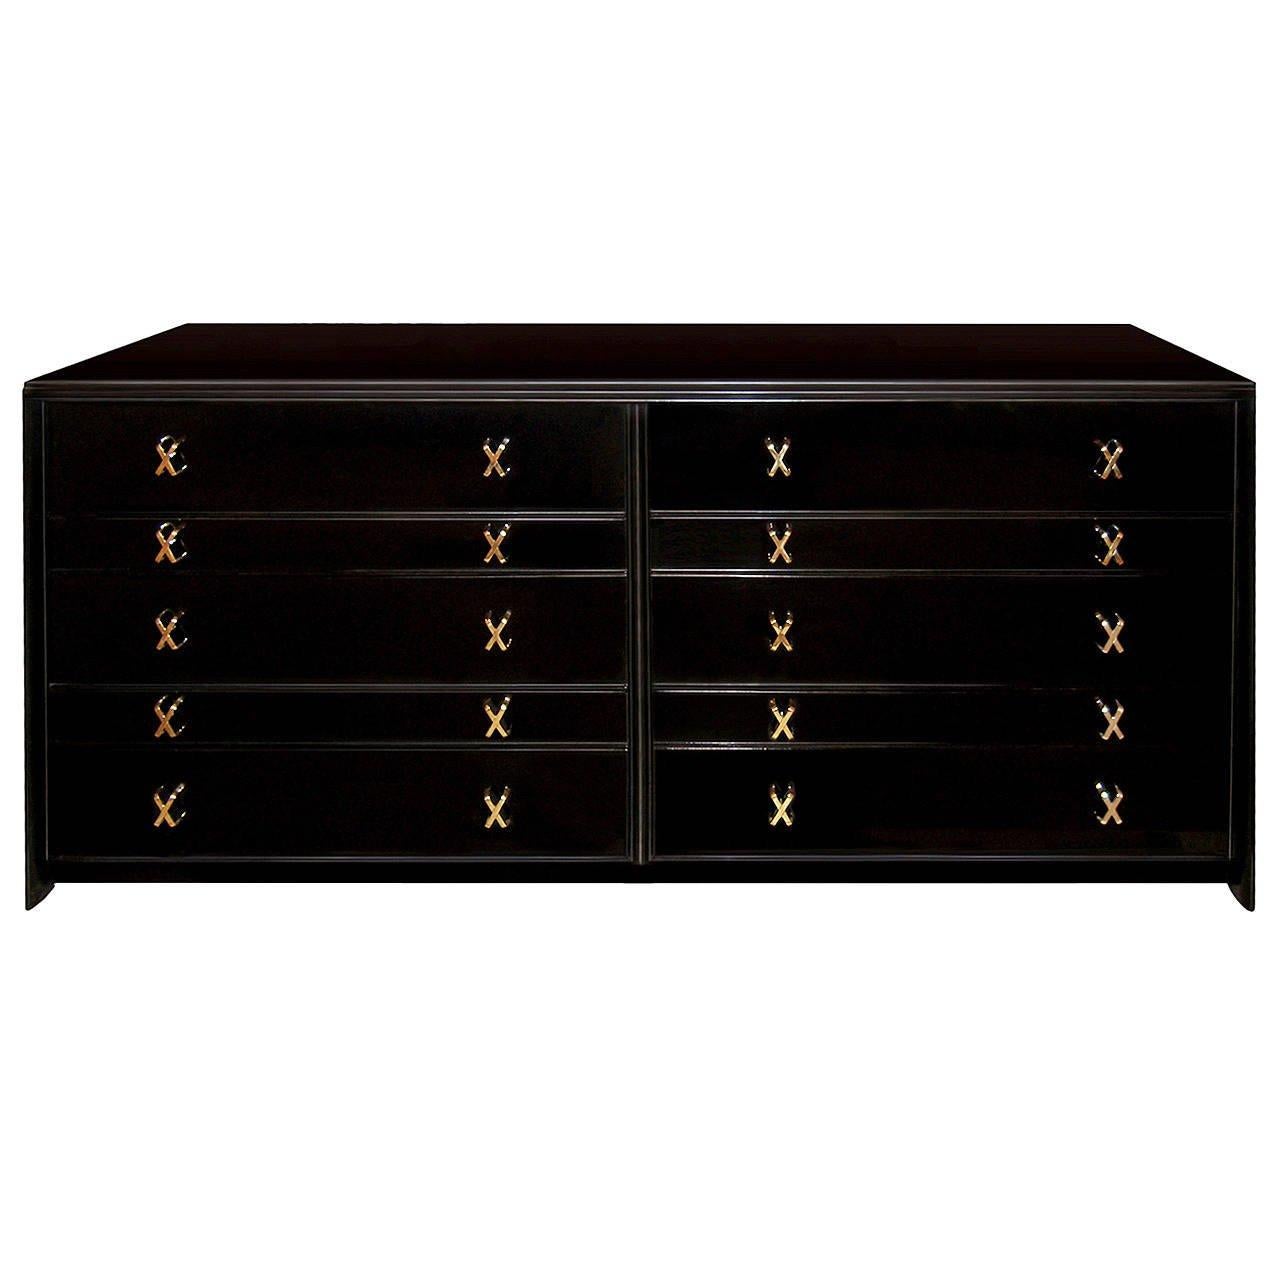 Paul Frankl Ebonized Walnut Dresser In Excellent Condition For Sale In New York, NY